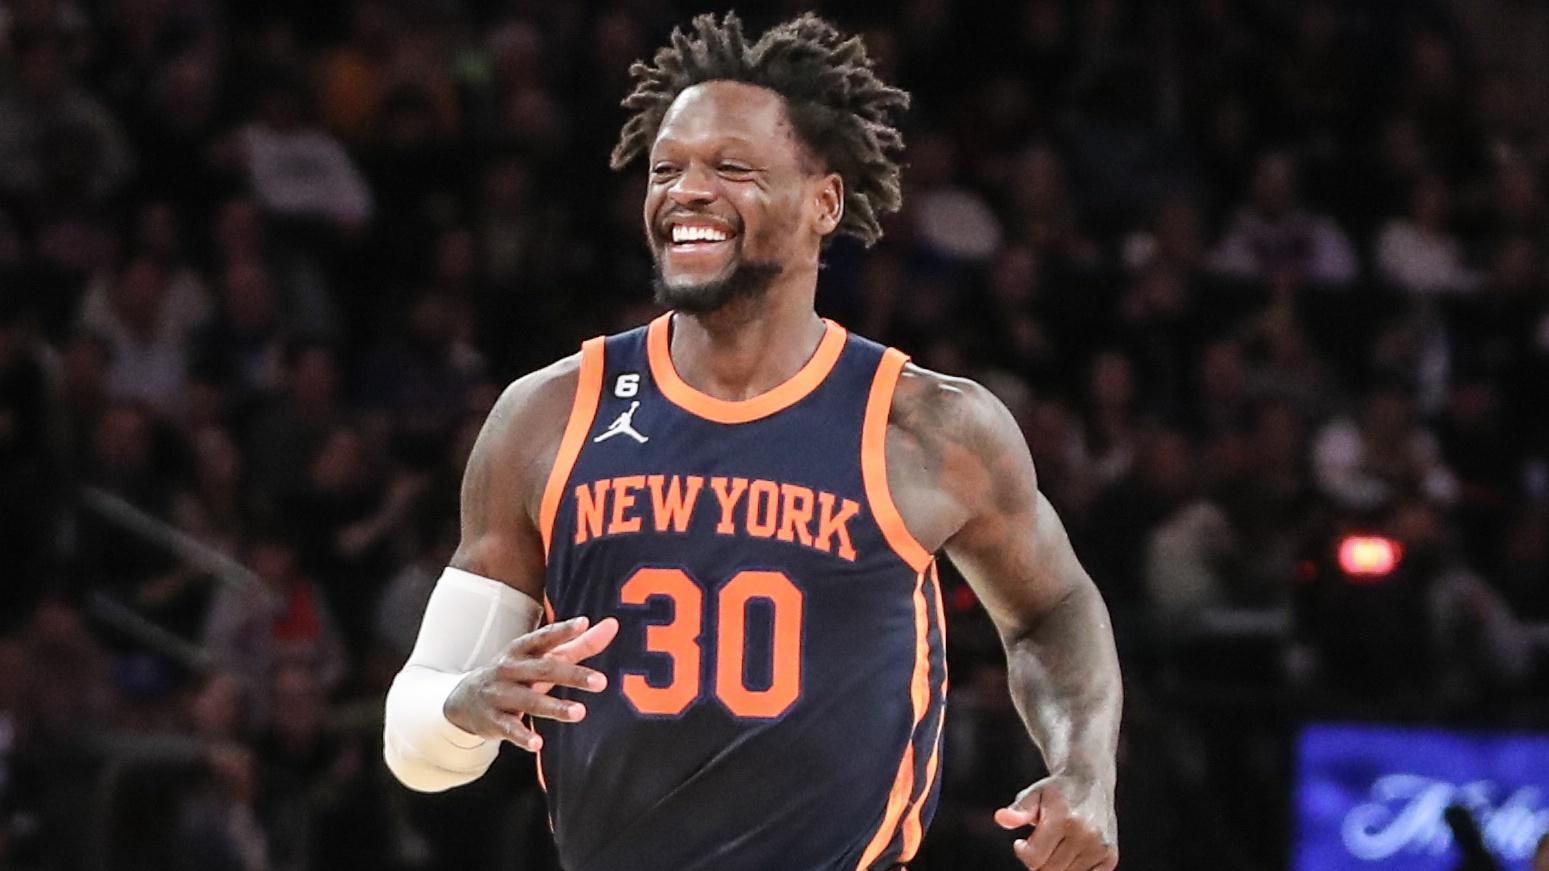 Feb 25, 2023; New York, New York, USA; New York Knicks forward Julius Randle (30) smiles after scoring against the New Orleans Pelicans in the fourth quarter at Madison Square Garden. / Wendell Cruz-USA TODAY Sports